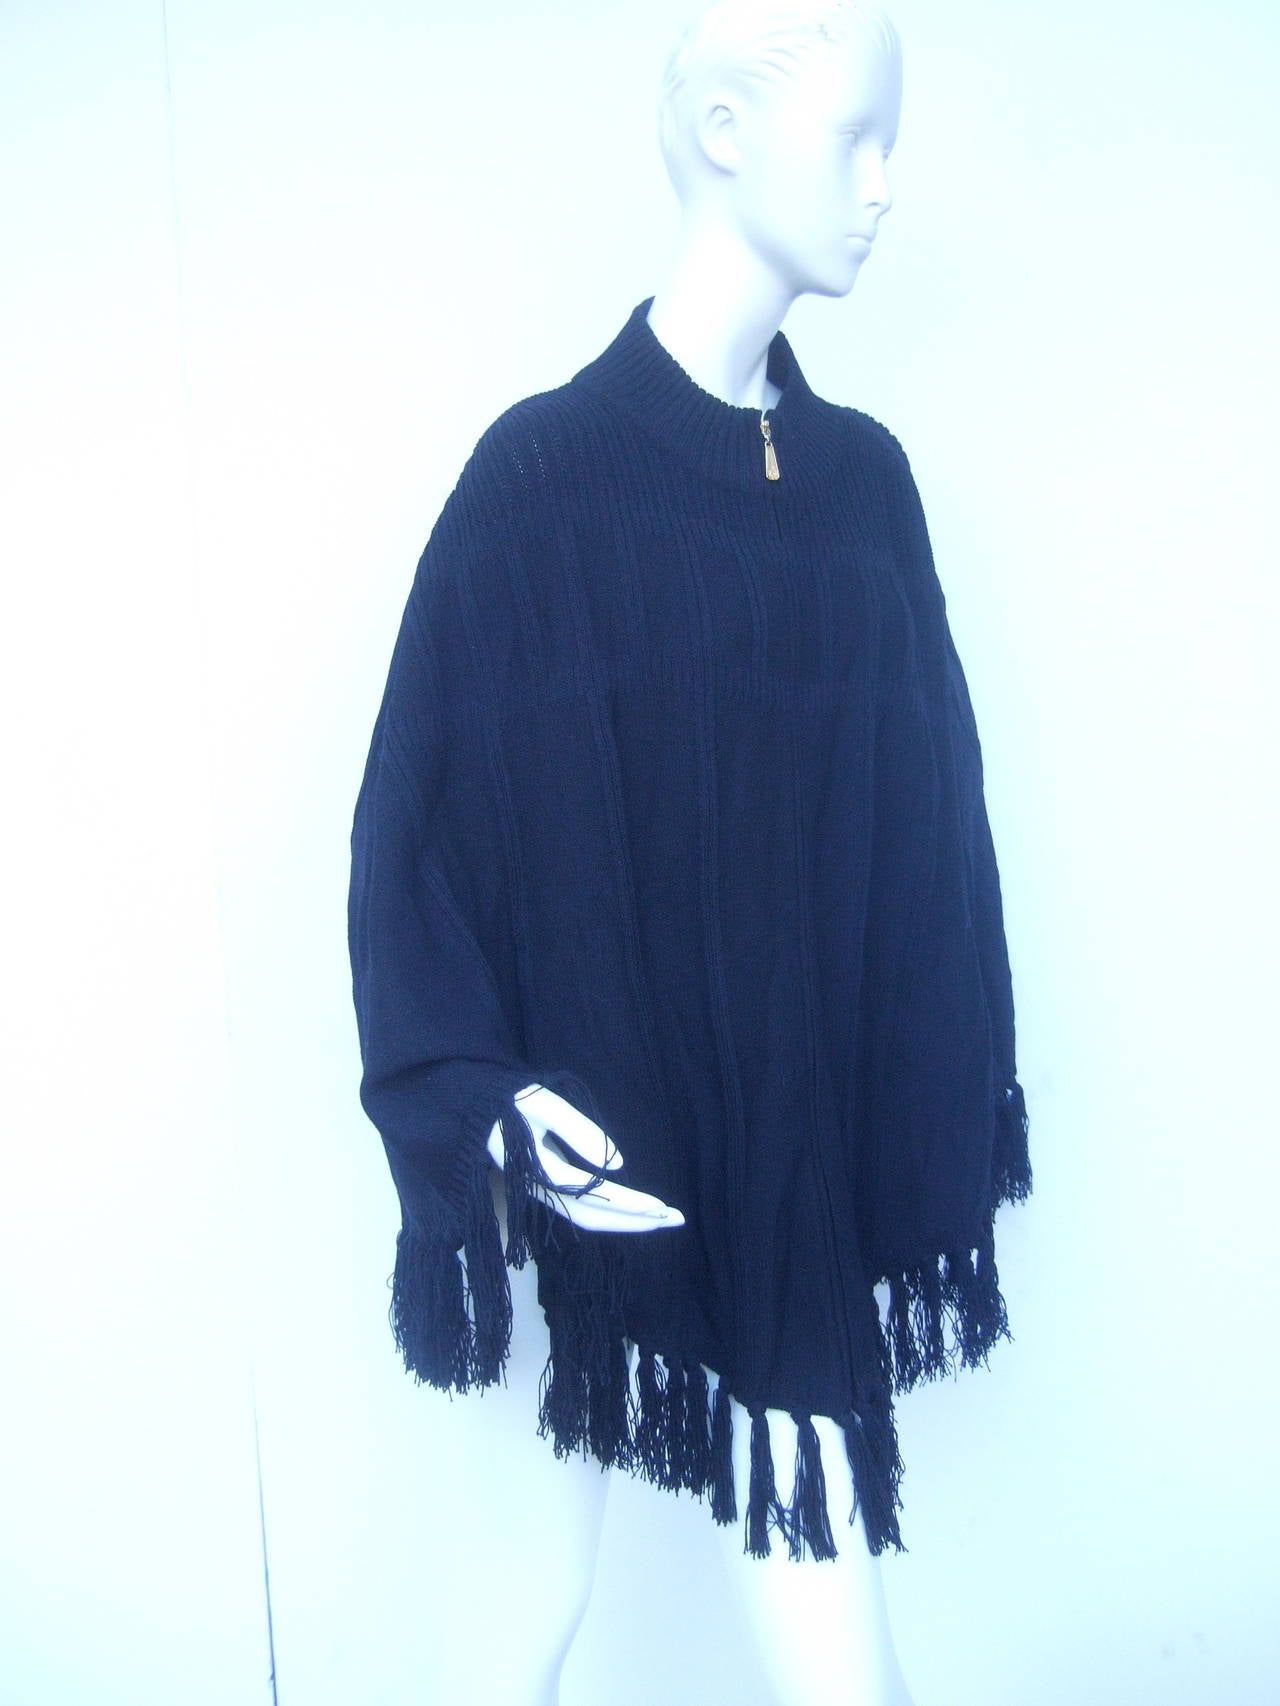 St John Sport Black fringe knit zippered poncho c 1990s
The stylish wool knit poncho is designed with ribbed detail on the neckline that frames the shoulders. The high fashion knit poncho zippers up the front with a gilt metal zipper pull inscribed